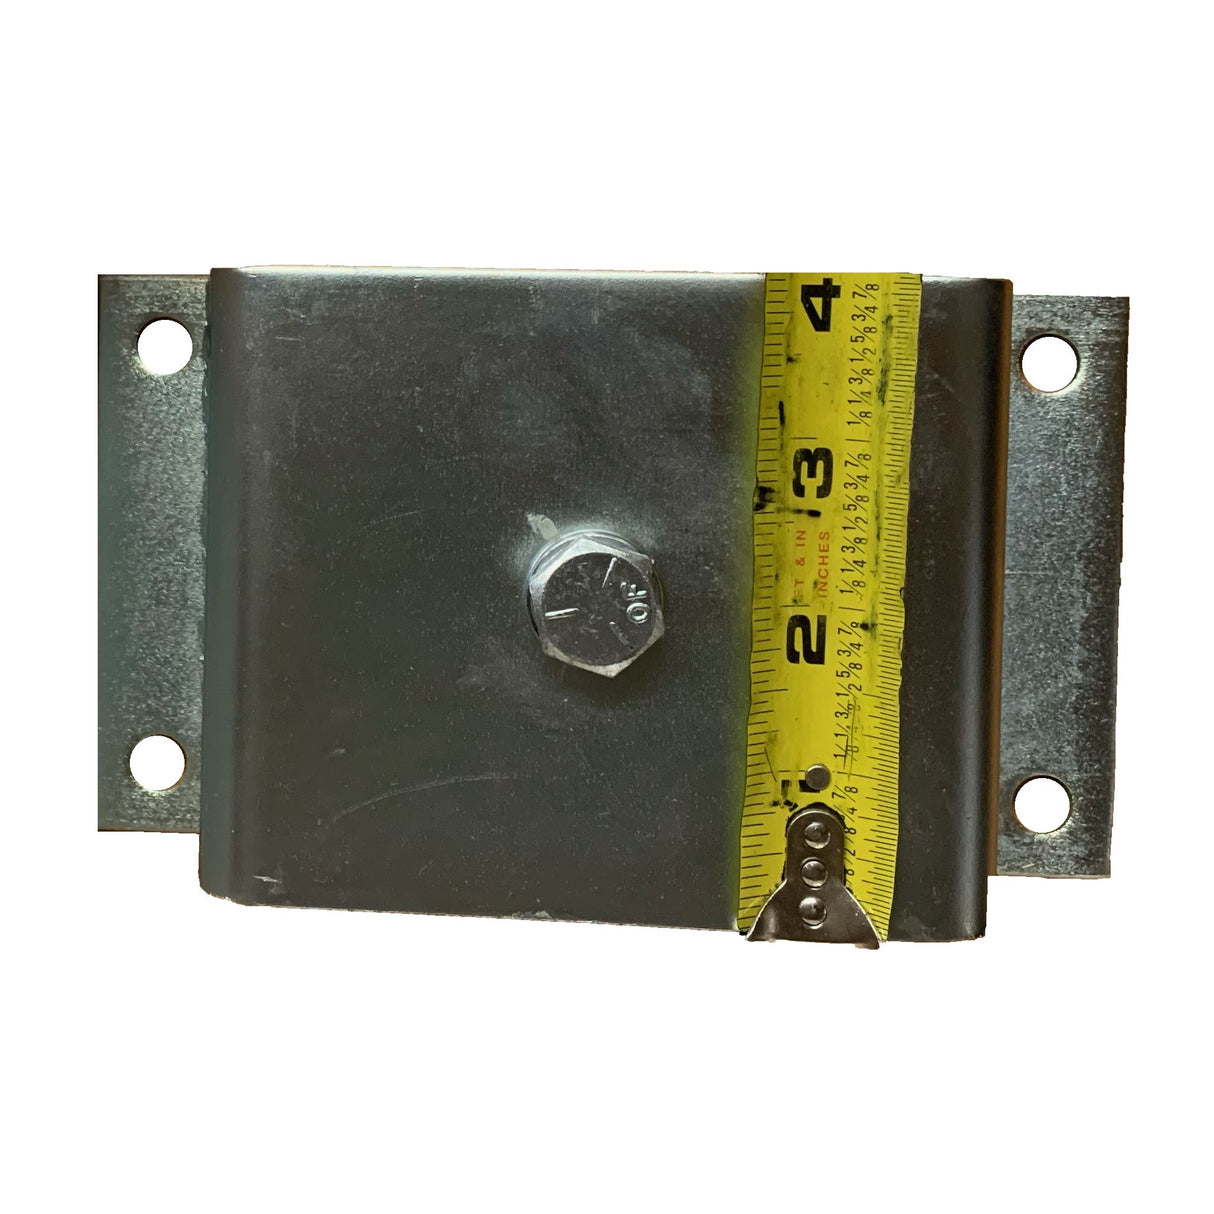 Doorking 2600-818 dimensions shown with a measuring tape